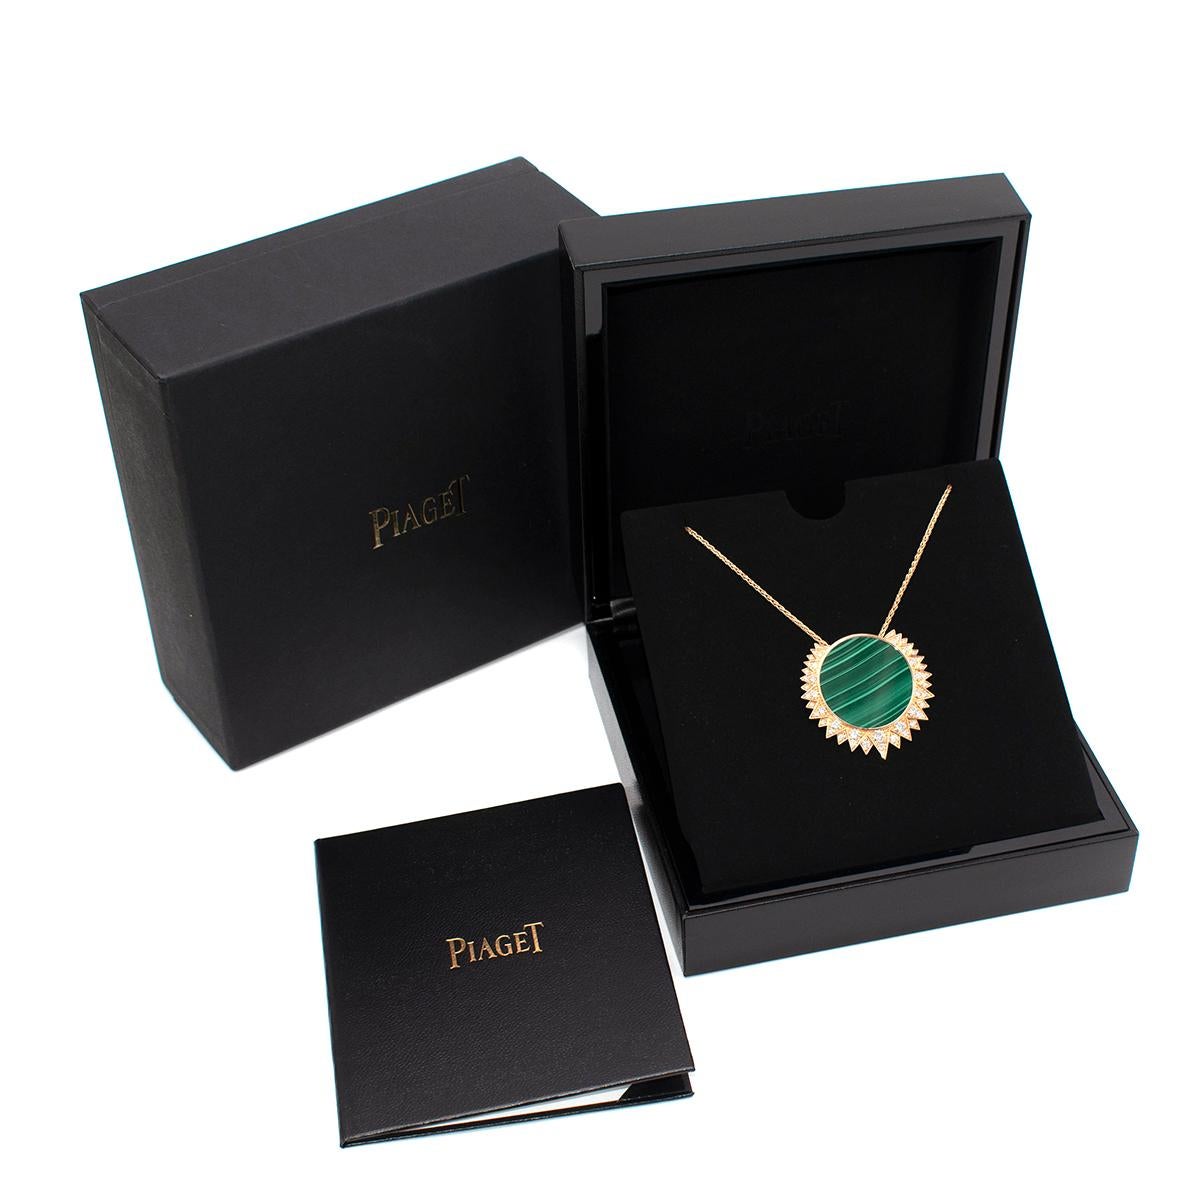 Piaget Rose Gold, Diamond and Malachite Sunlight Pendant Necklace

- Current collection
- Malachite encircled with beams of 18-karat rose gold and brilliant-cut diamonds

Materials:
- Malachite
- Rose Gold
- Diamonds